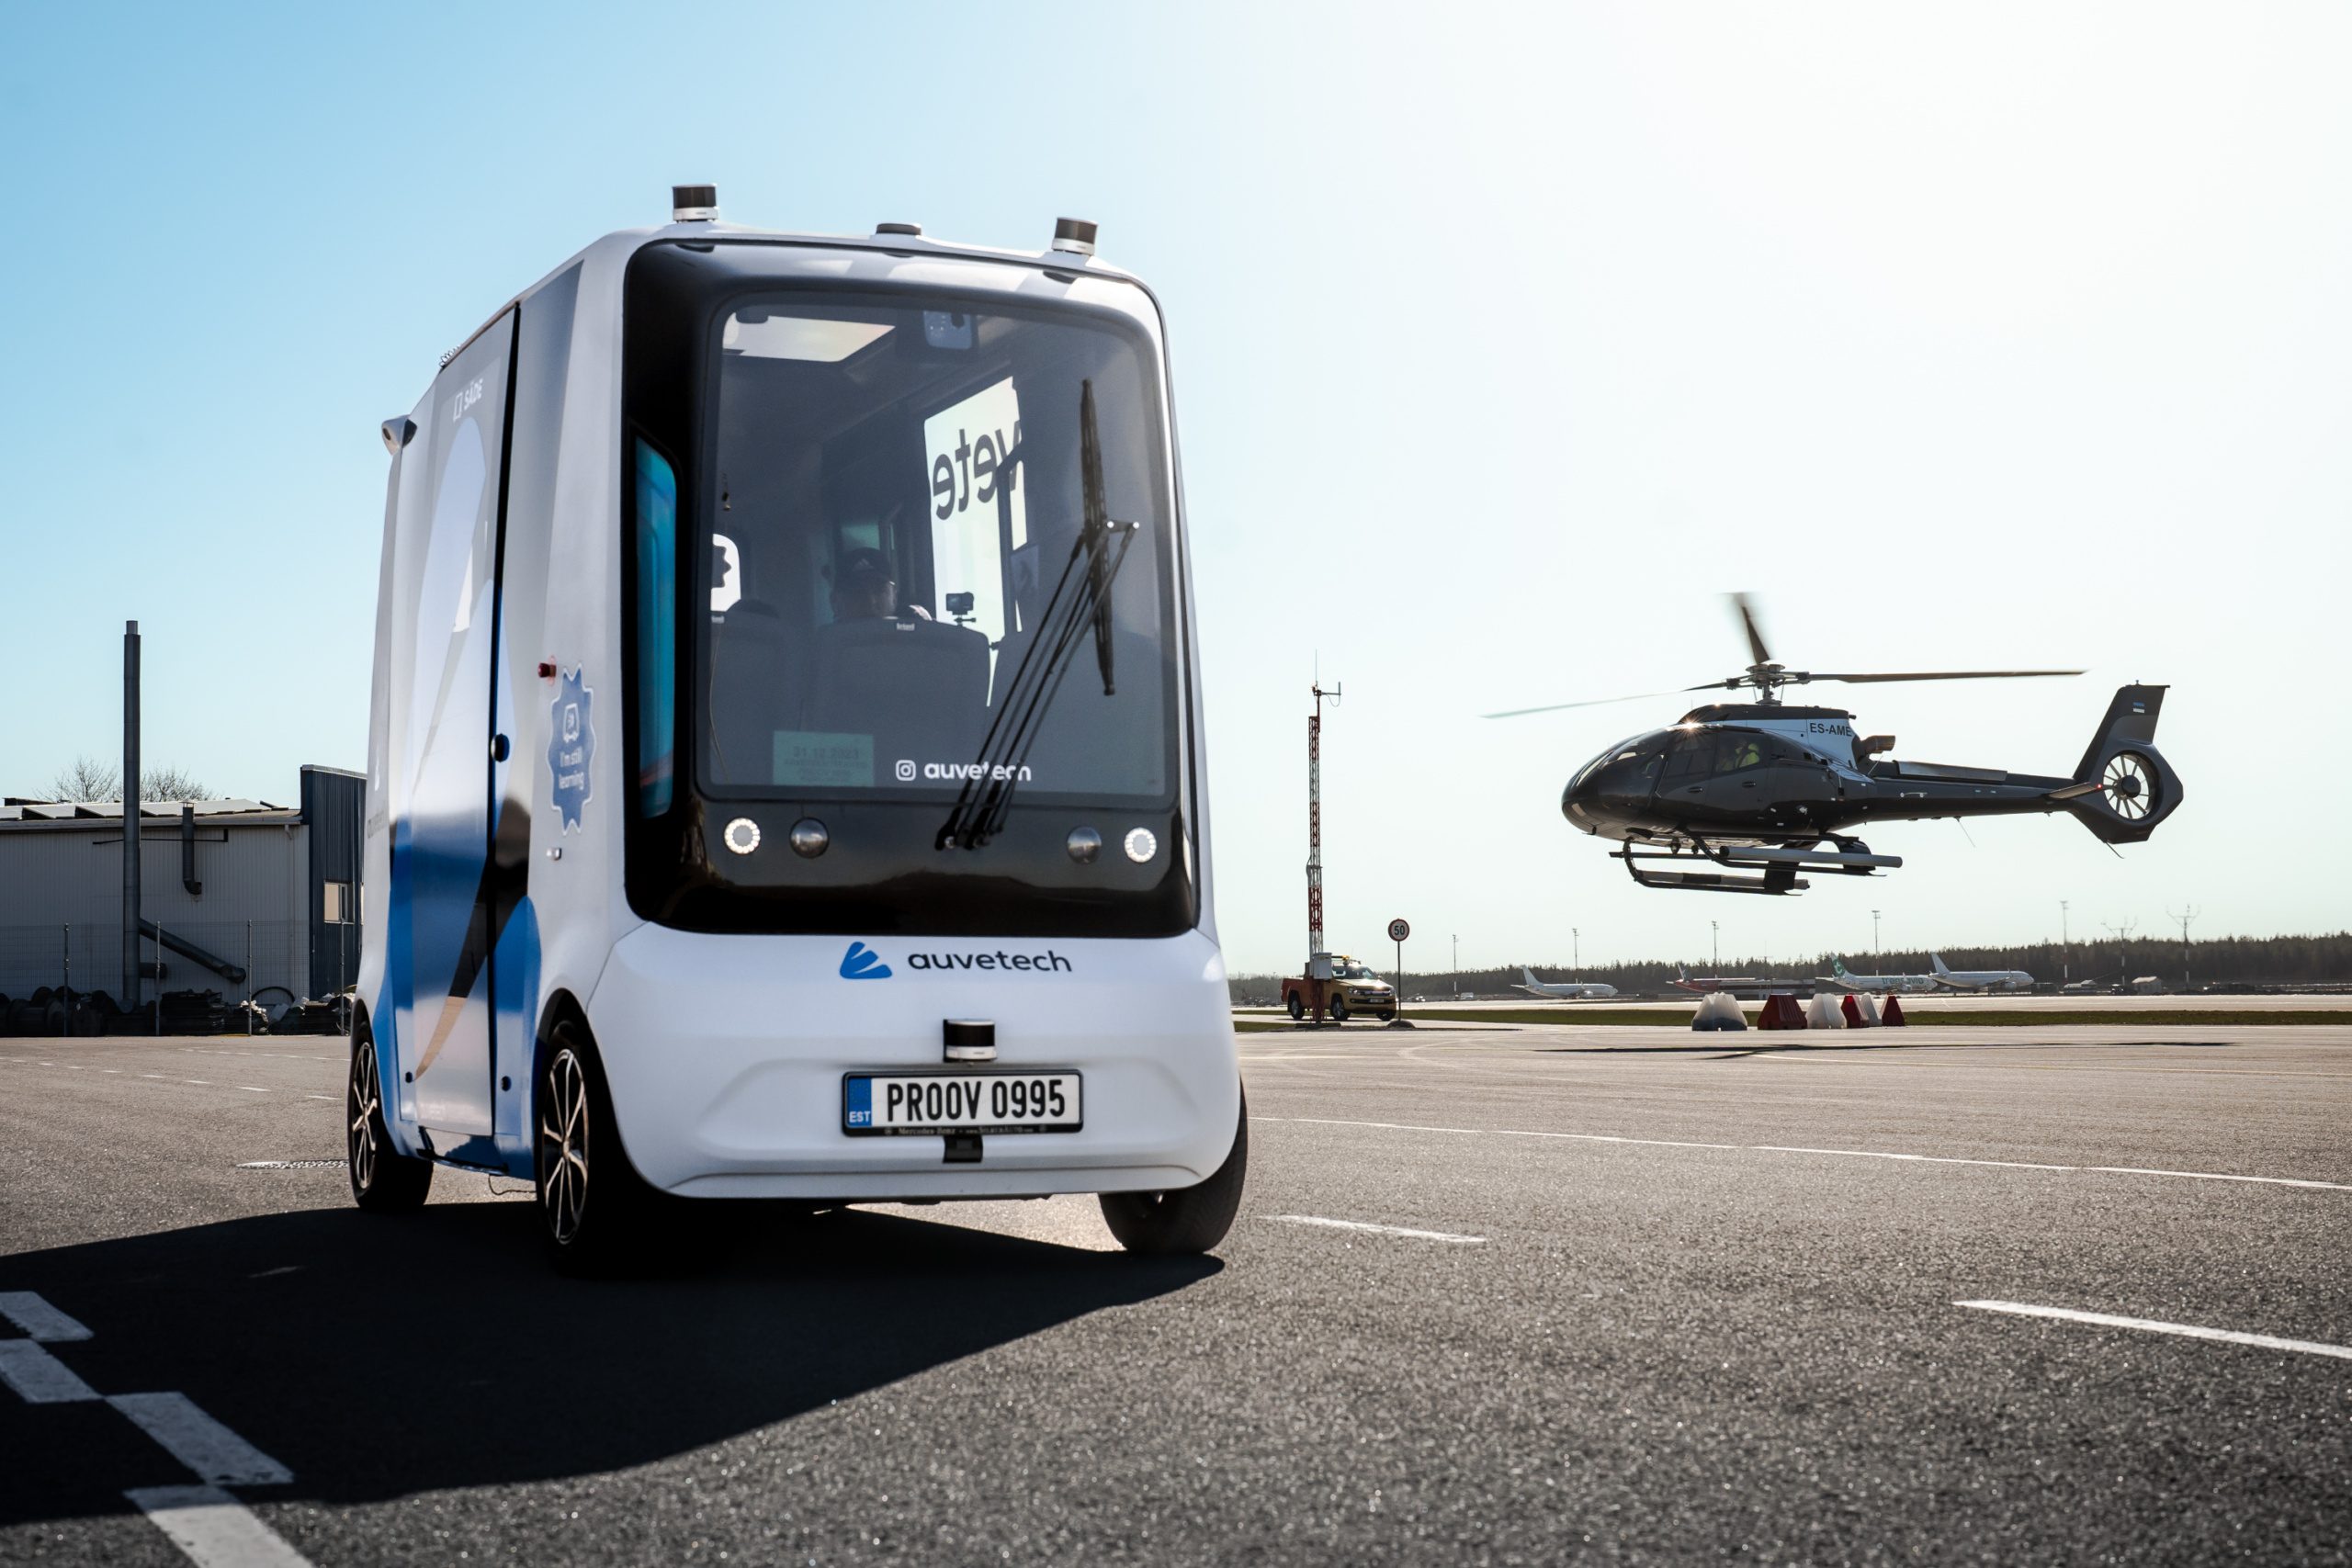 World’s first autonomous shuttle helicopter detection test